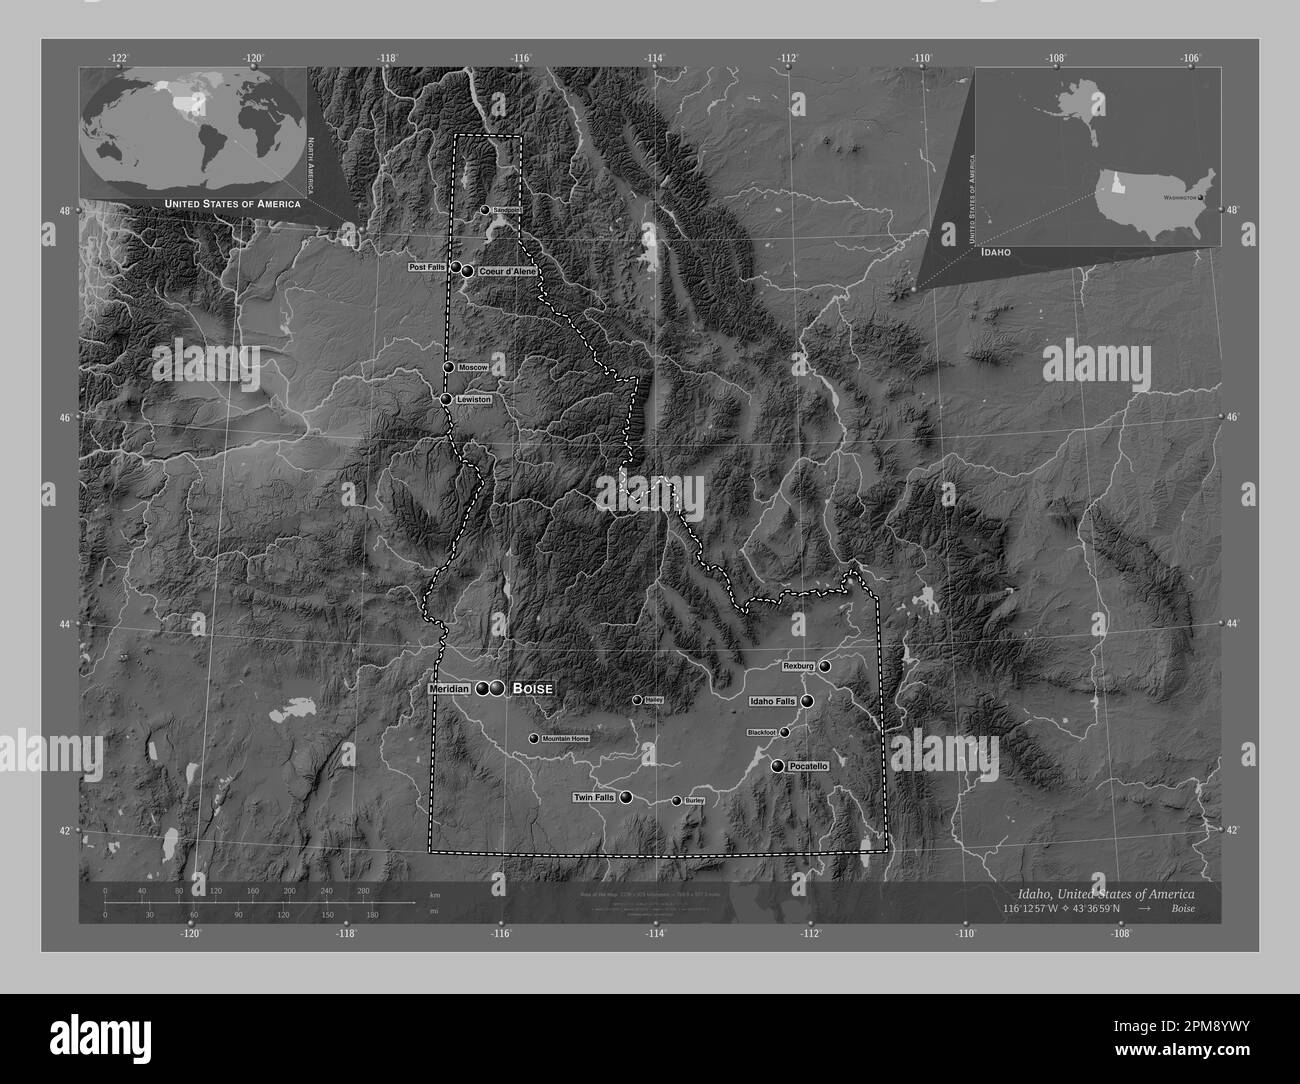 Idaho, state of United States of America. Grayscale elevation map with lakes and rivers. Locations and names of major cities of the region. Corner aux Stock Photo